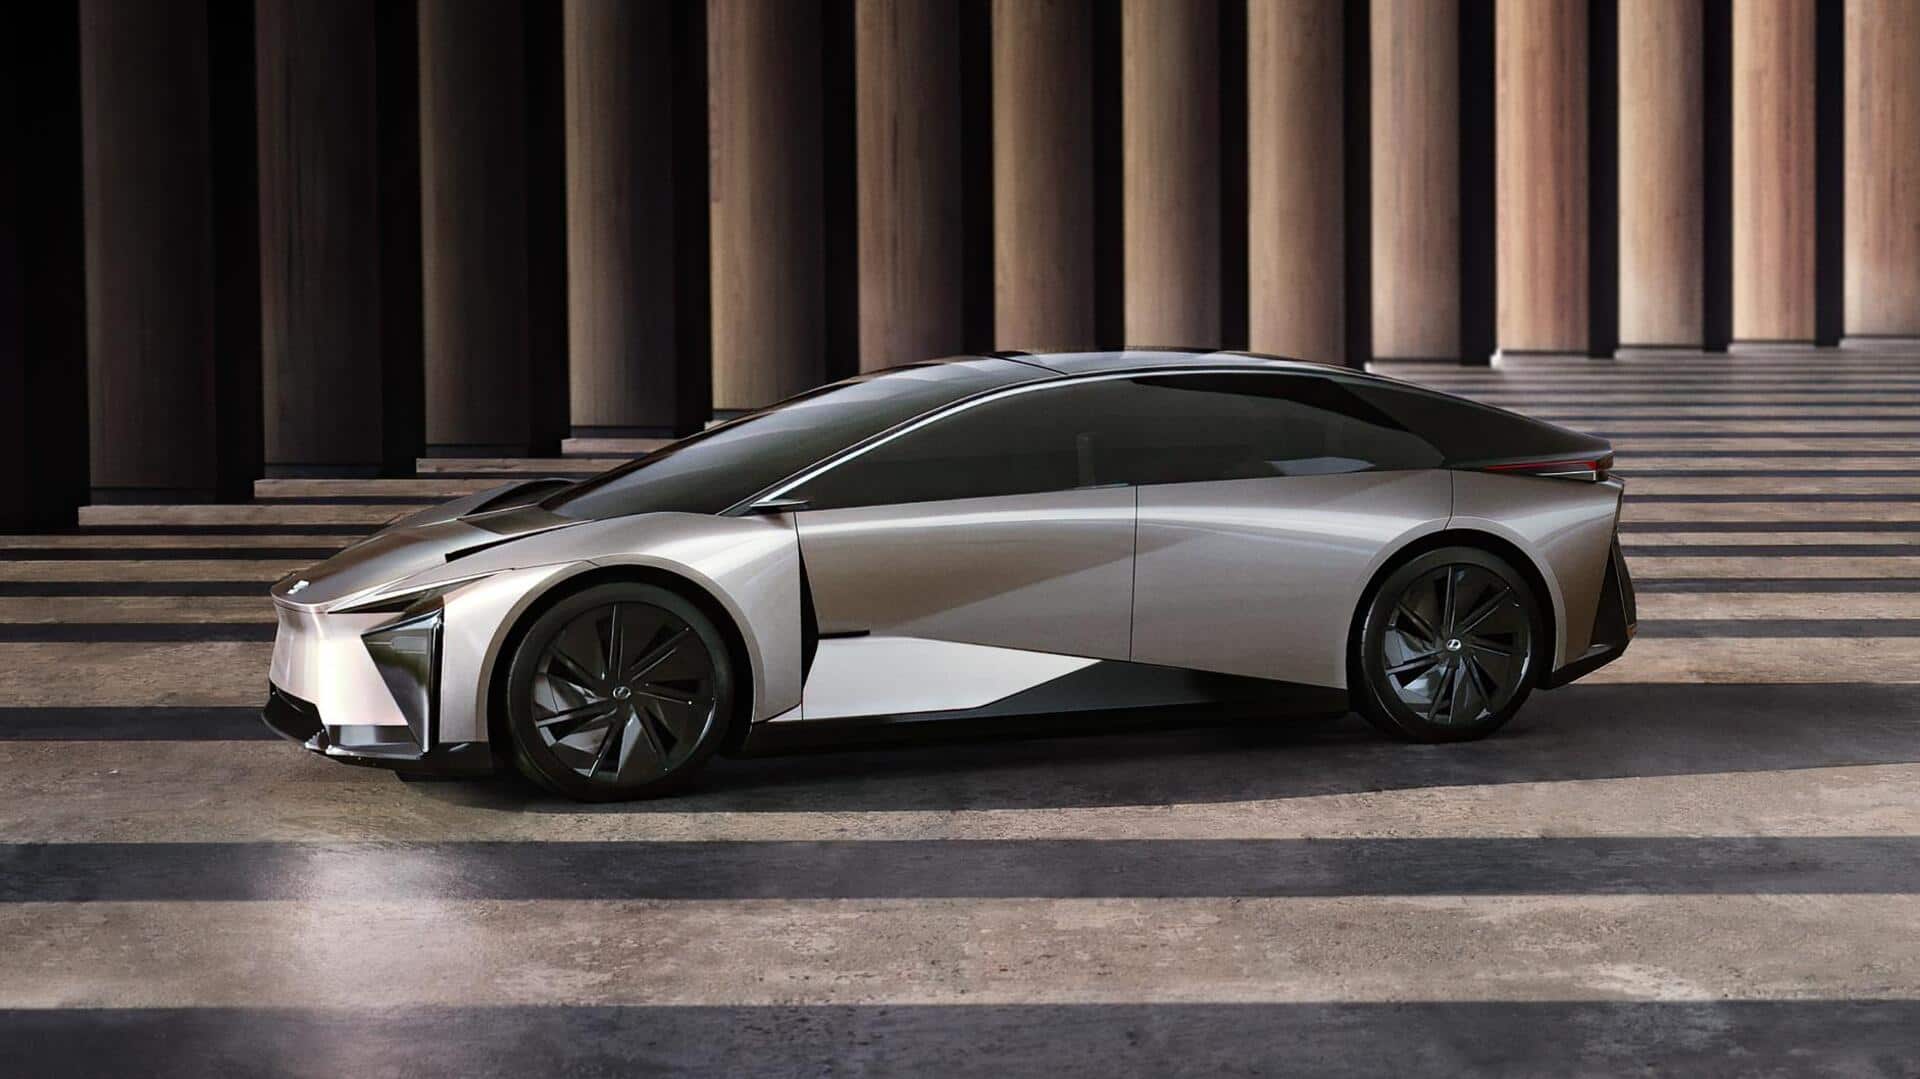 Lexus LF-ZC concept previews the company's upcoming luxury electric coupe